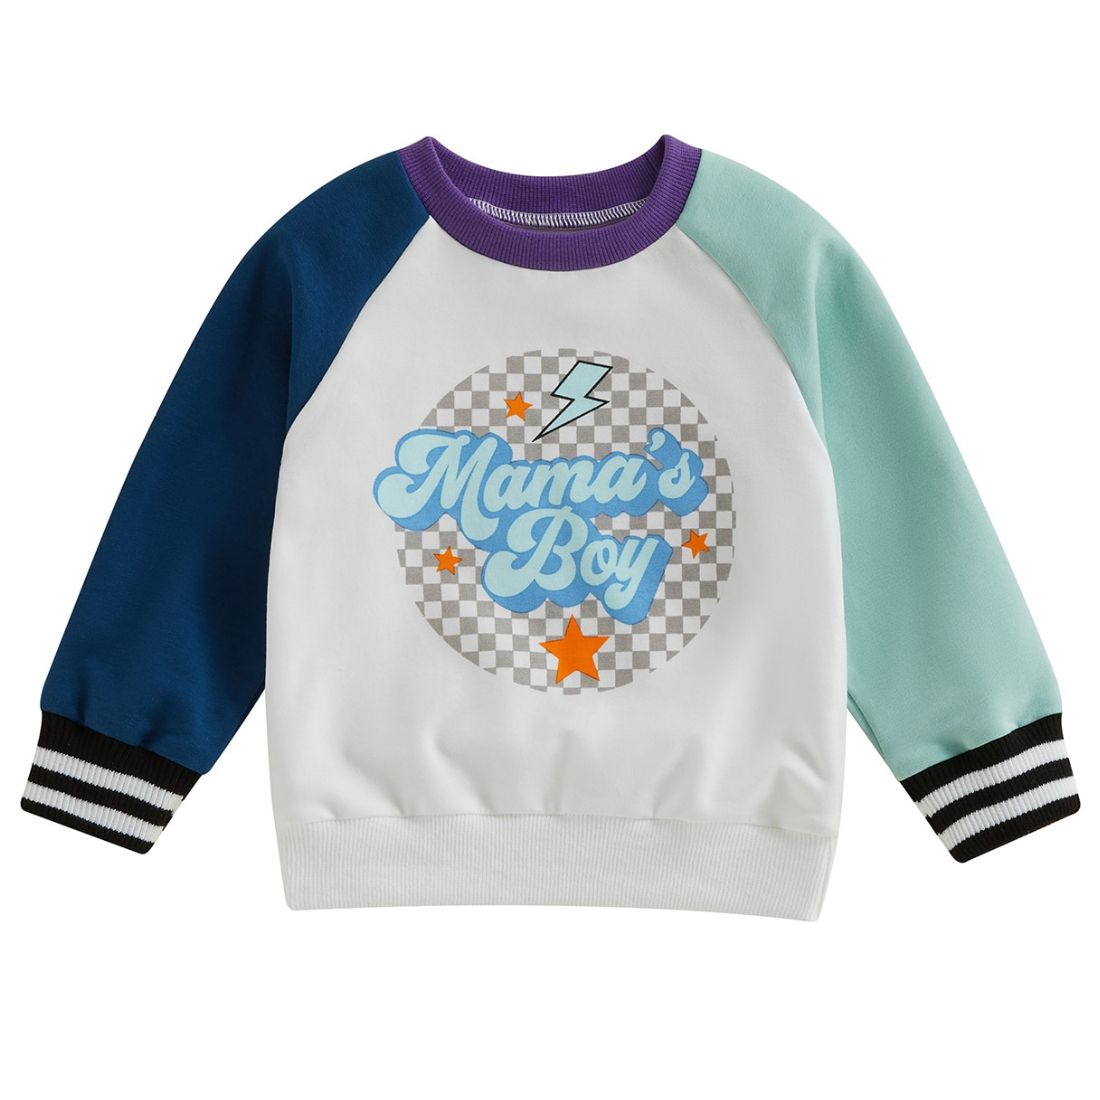 Little Boy Mama's Boy Retro Baby Sweatshirt - My Trendy Youngsters | Buy on-trend and stylish Baby and Toddler Clothing Sets @ My Trendy Youngsters - Dress your little one in Style @ My Trendy Youngsters 